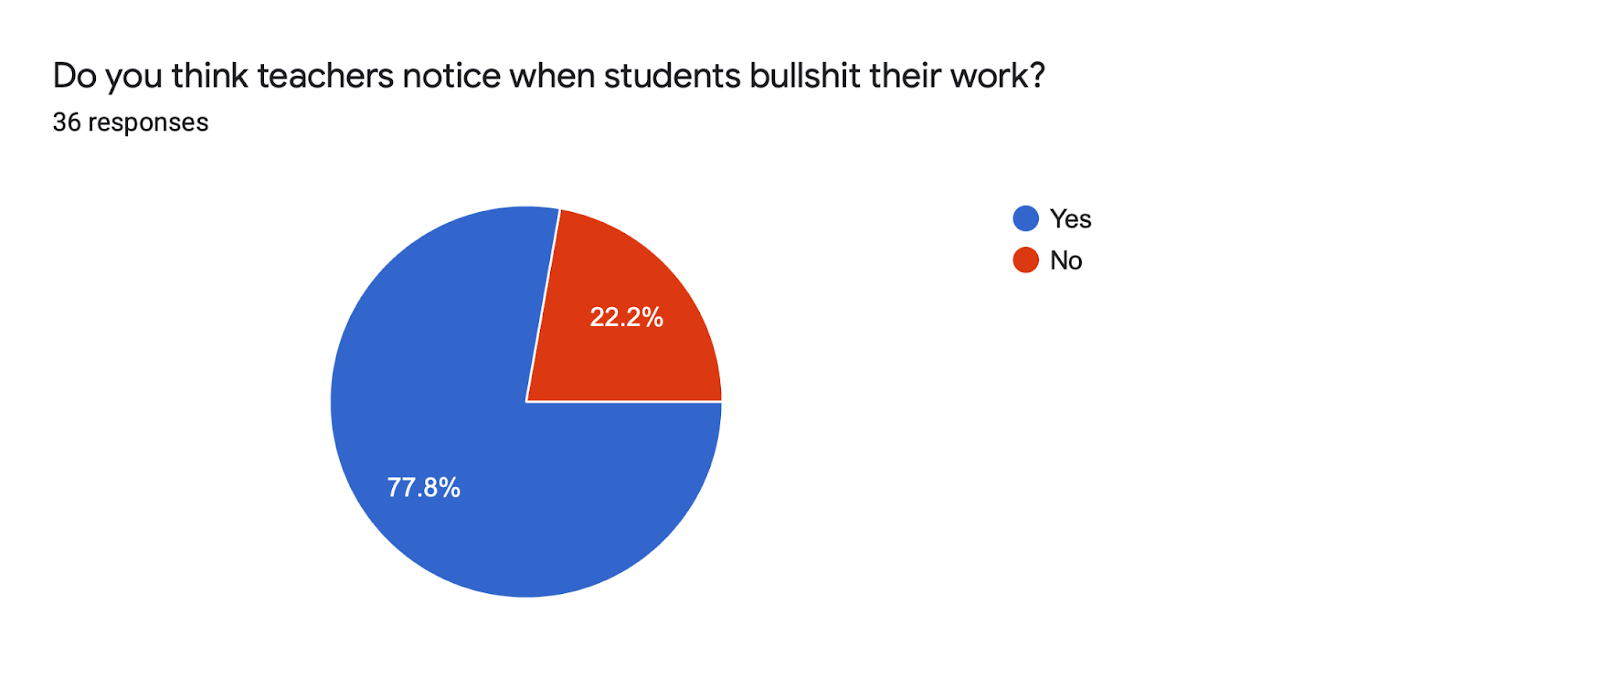 Forms response chart. Question title: Do you think teachers notice when students bullshit their work?. Number of responses: 36 responses.